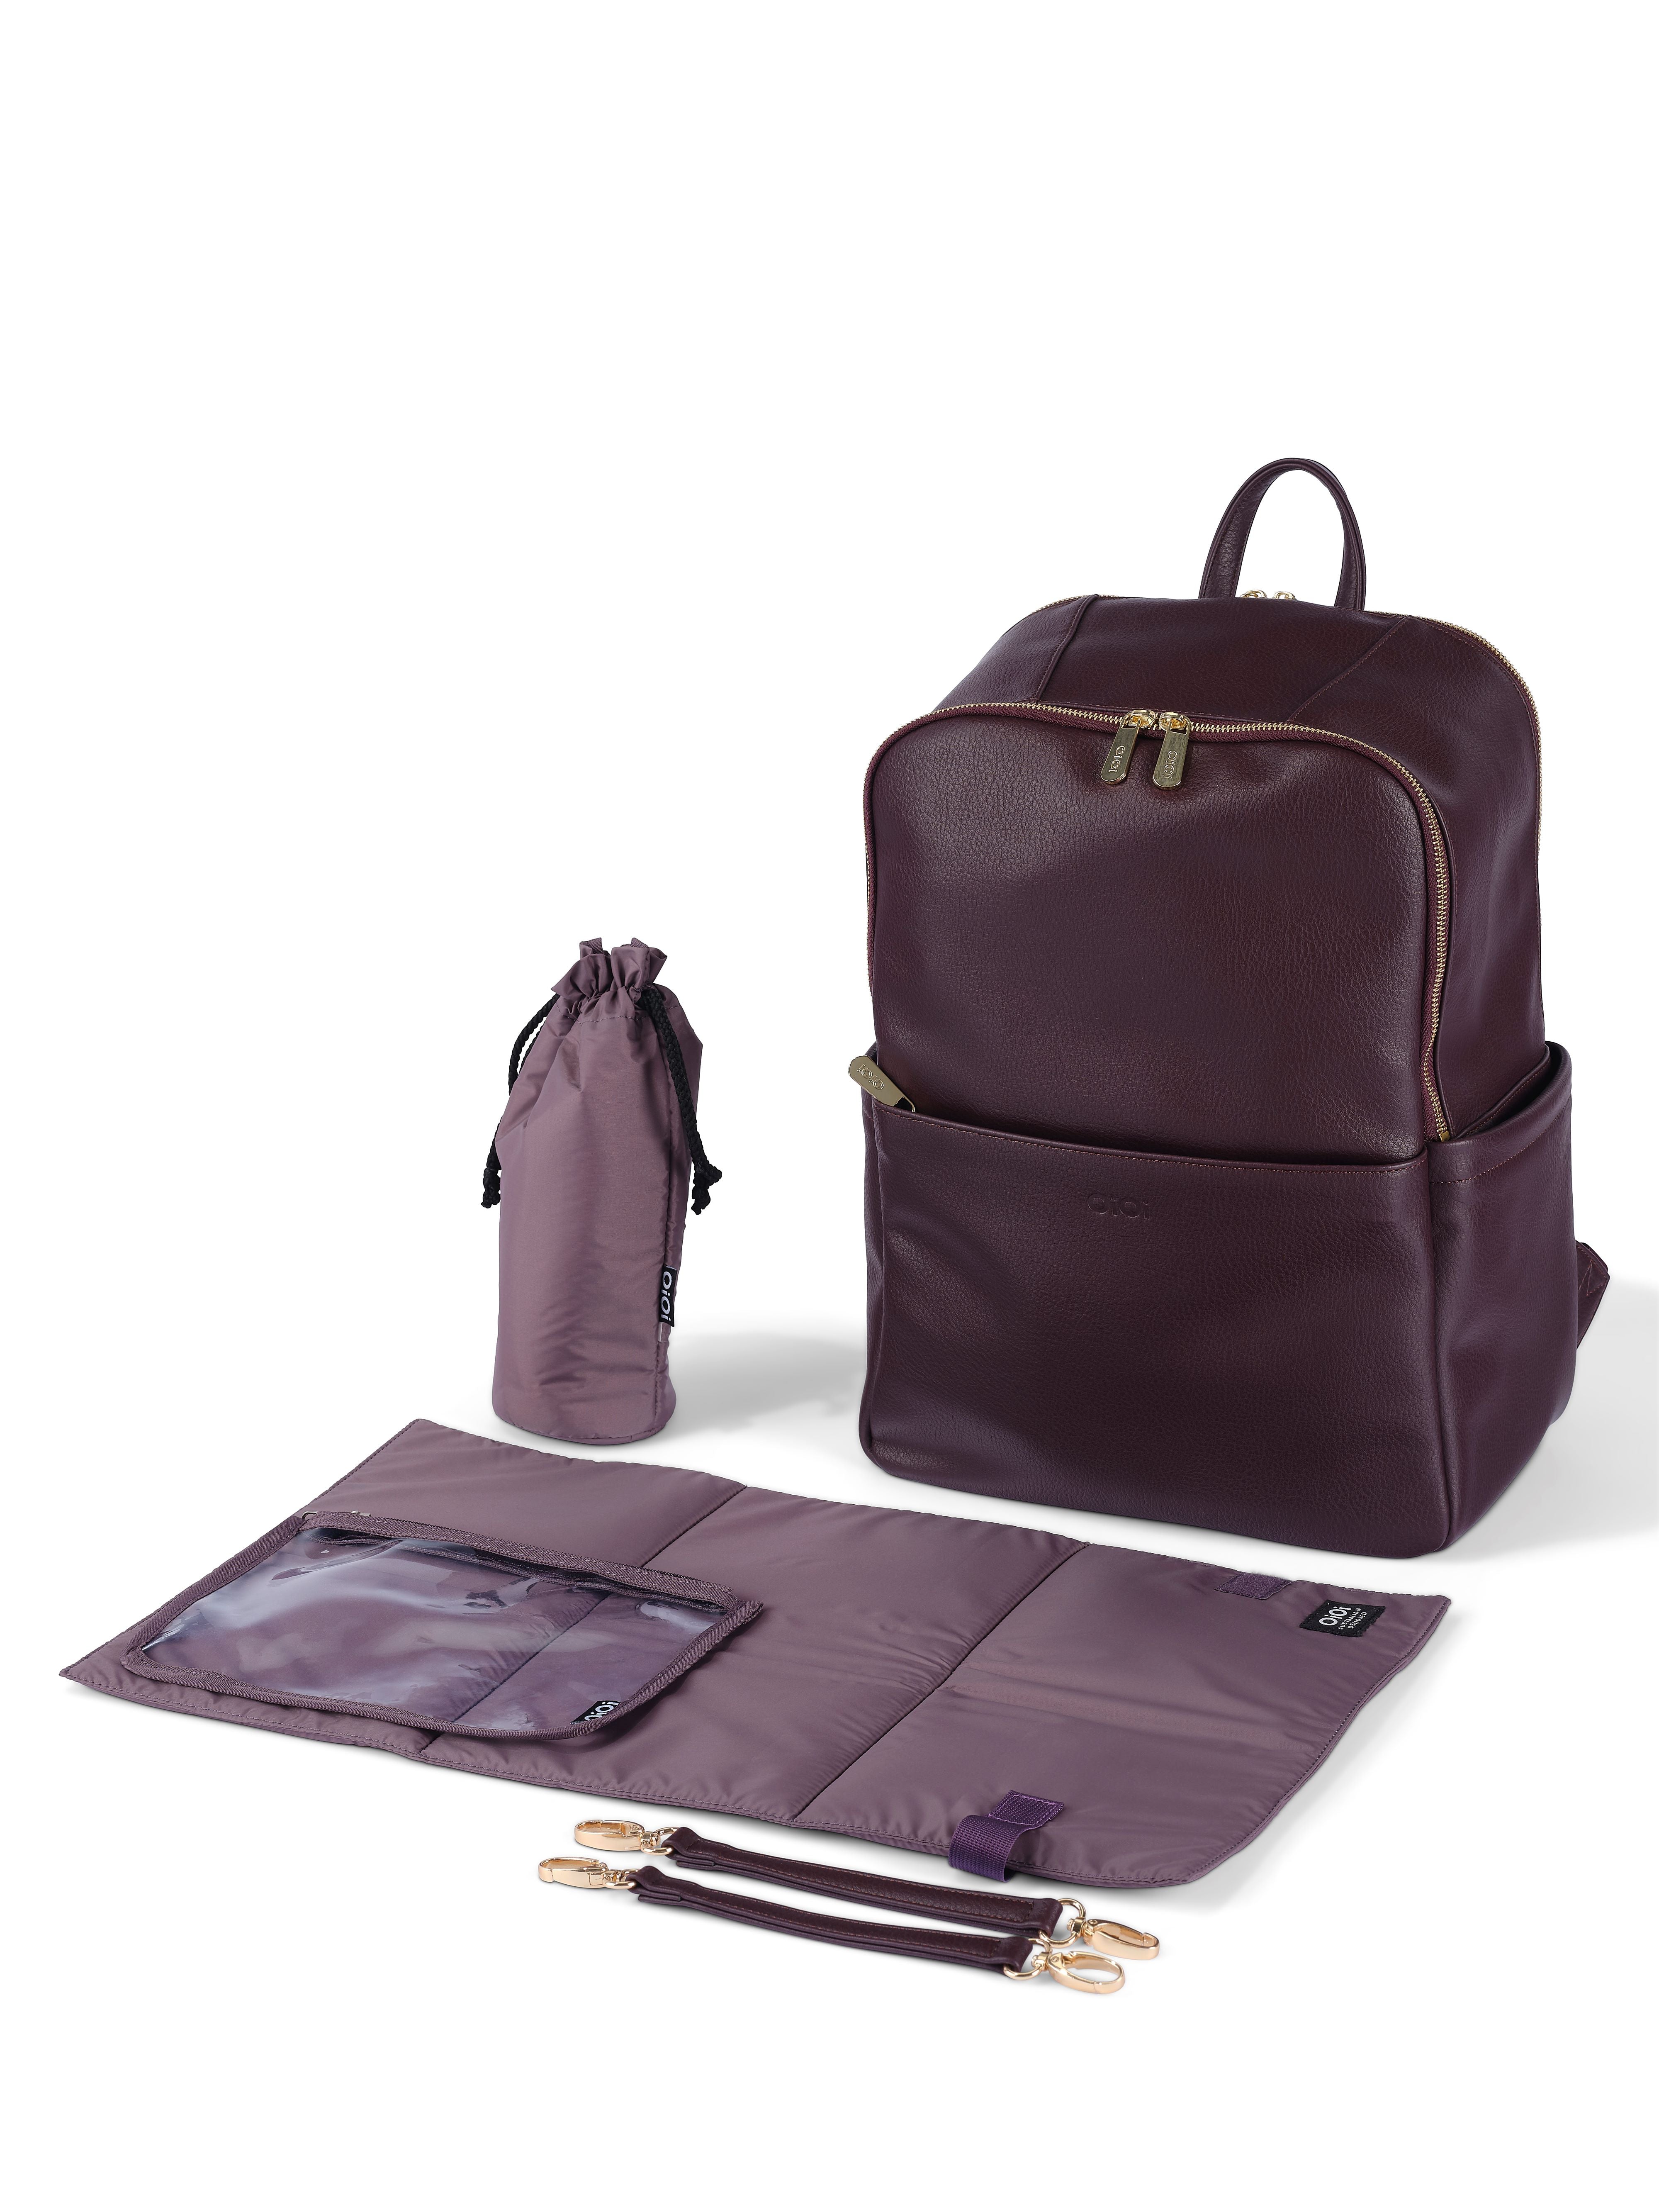 OiOi Multitasker Nappy Backpack Mulberry Vegan Leather